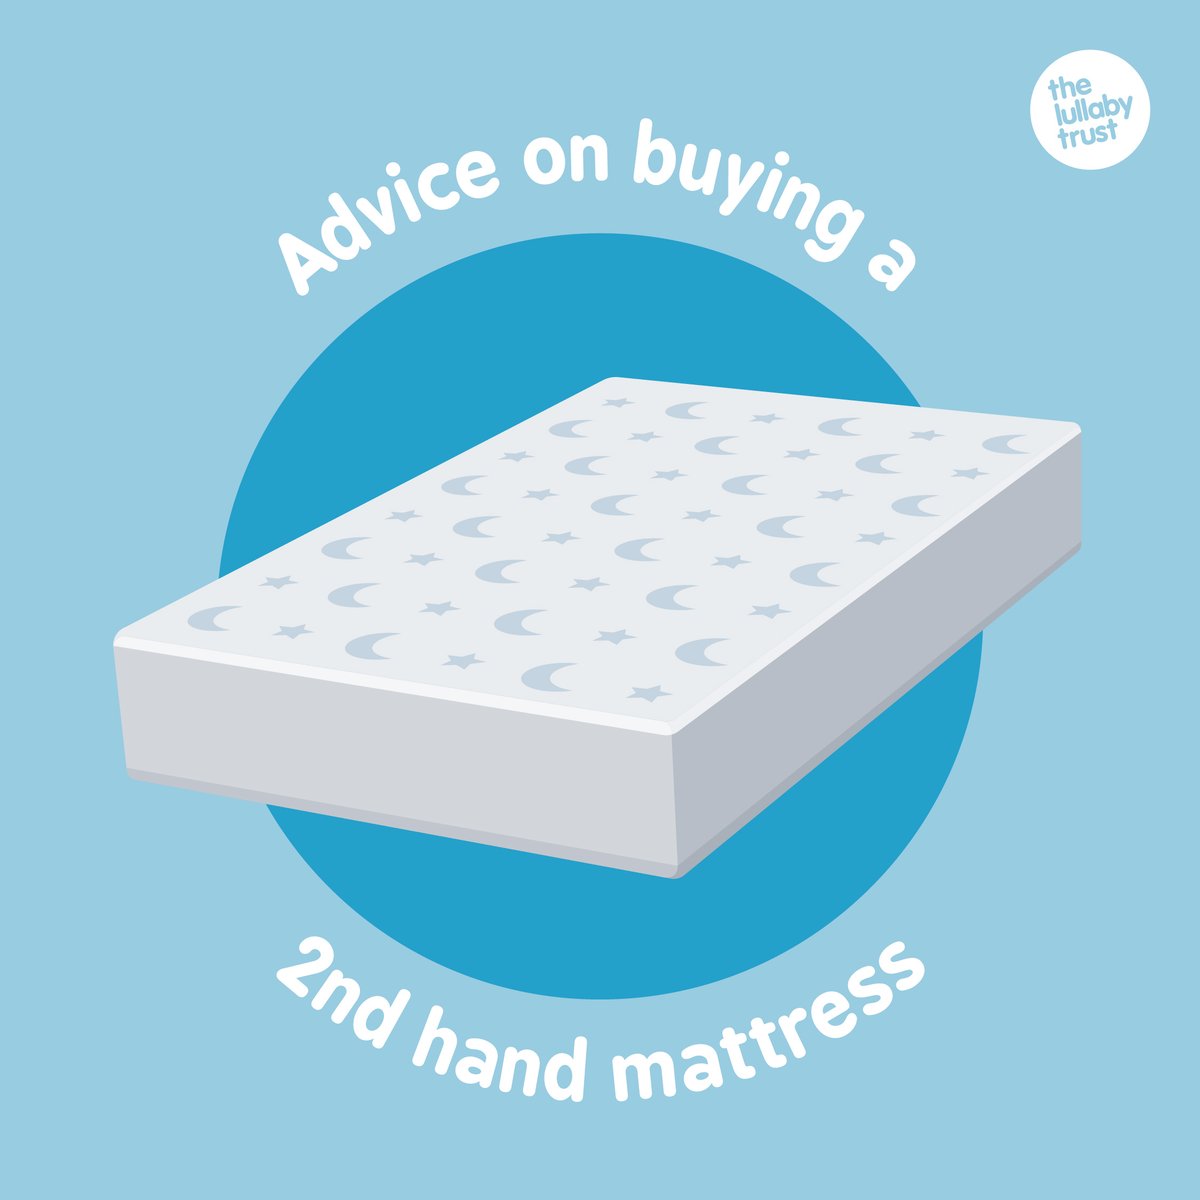 Reduce some of the risks of using a second-hand mattress by choosing one that: - 💧 Has been protected by a waterproof cover ⭐ Is in good condition 🧵 Has no rips or tears 🤜 Is firm and flat 🔥 Has a fire-resistant label 📏 Fits well with no gaps